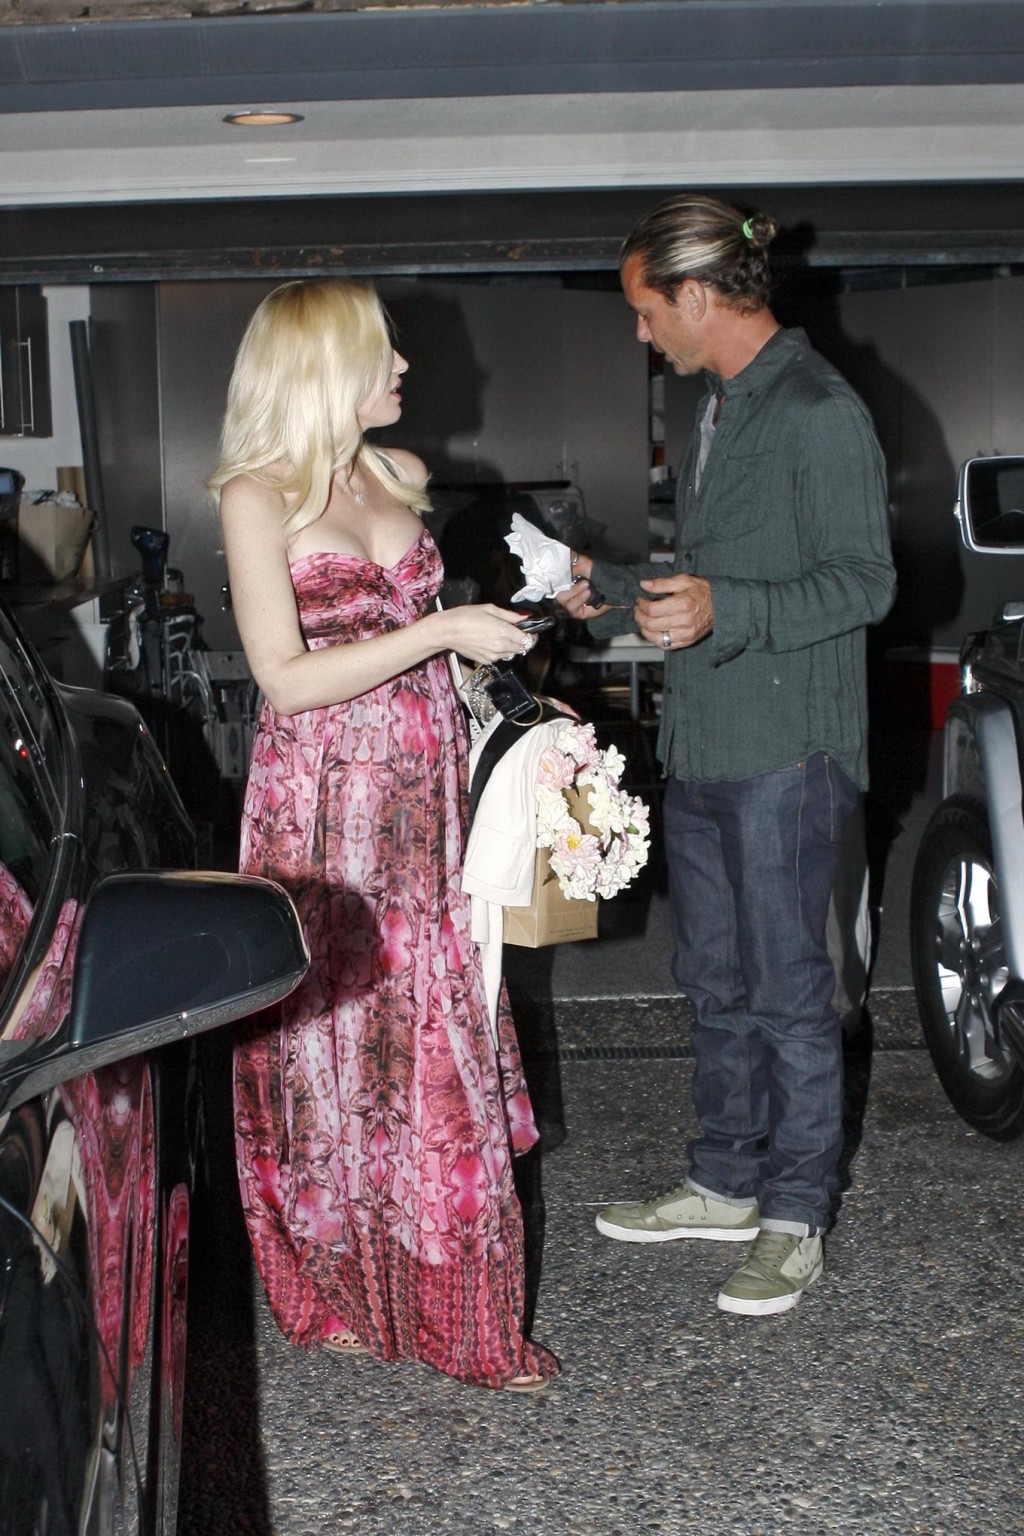 Gwen Stefani shows off her breast implants wearing a strapless dress outside a f #75214192